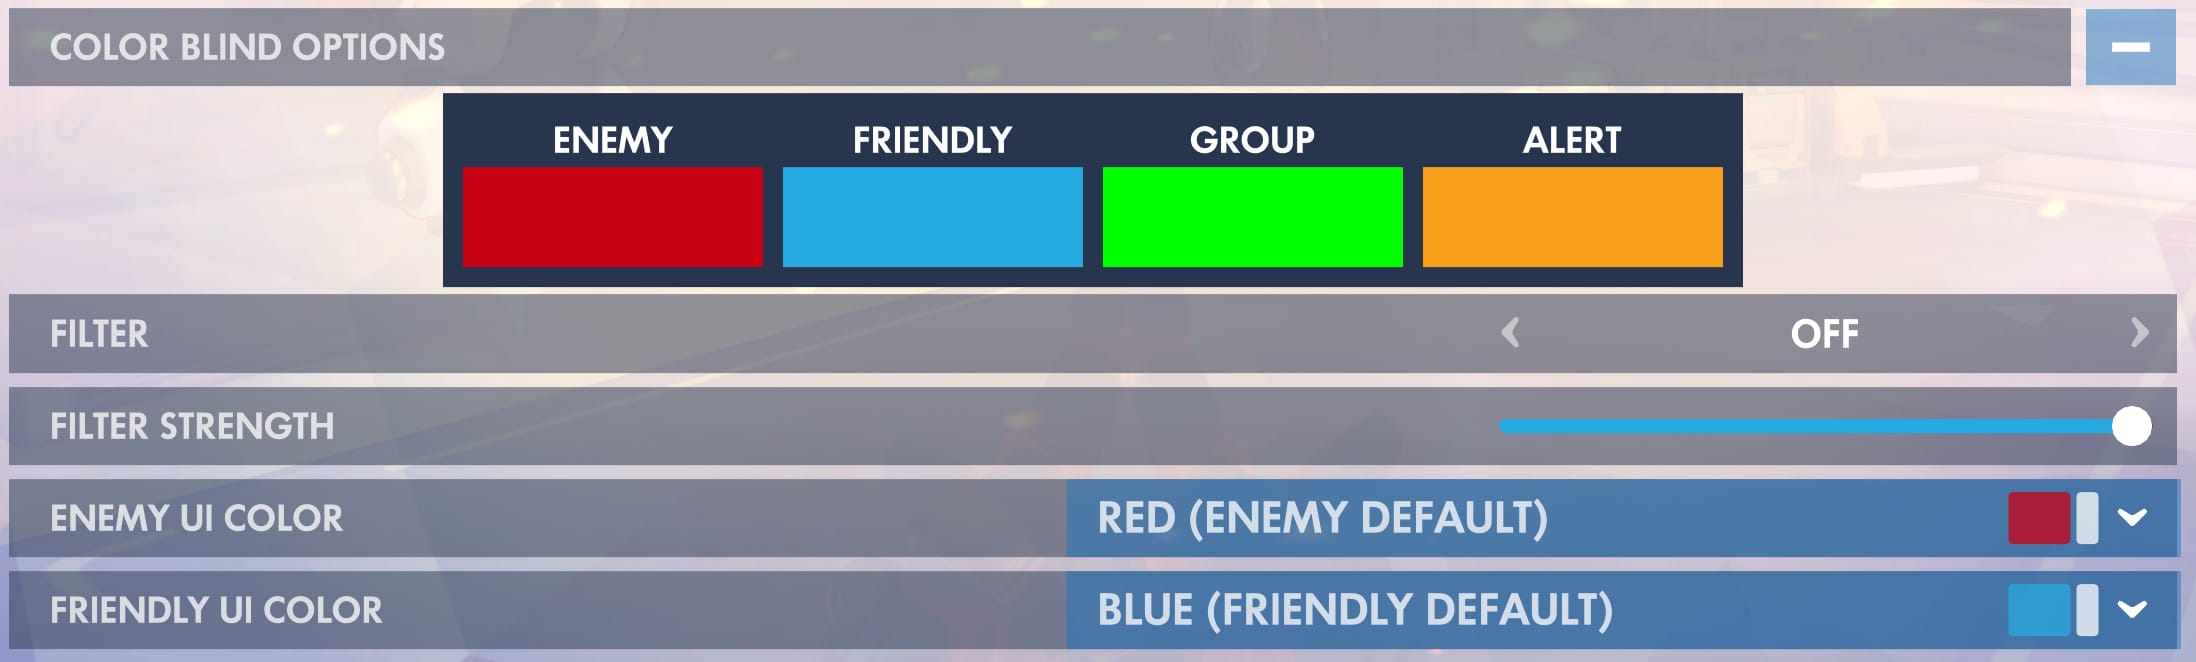 Overwatch's options have multiple setting regarding colors